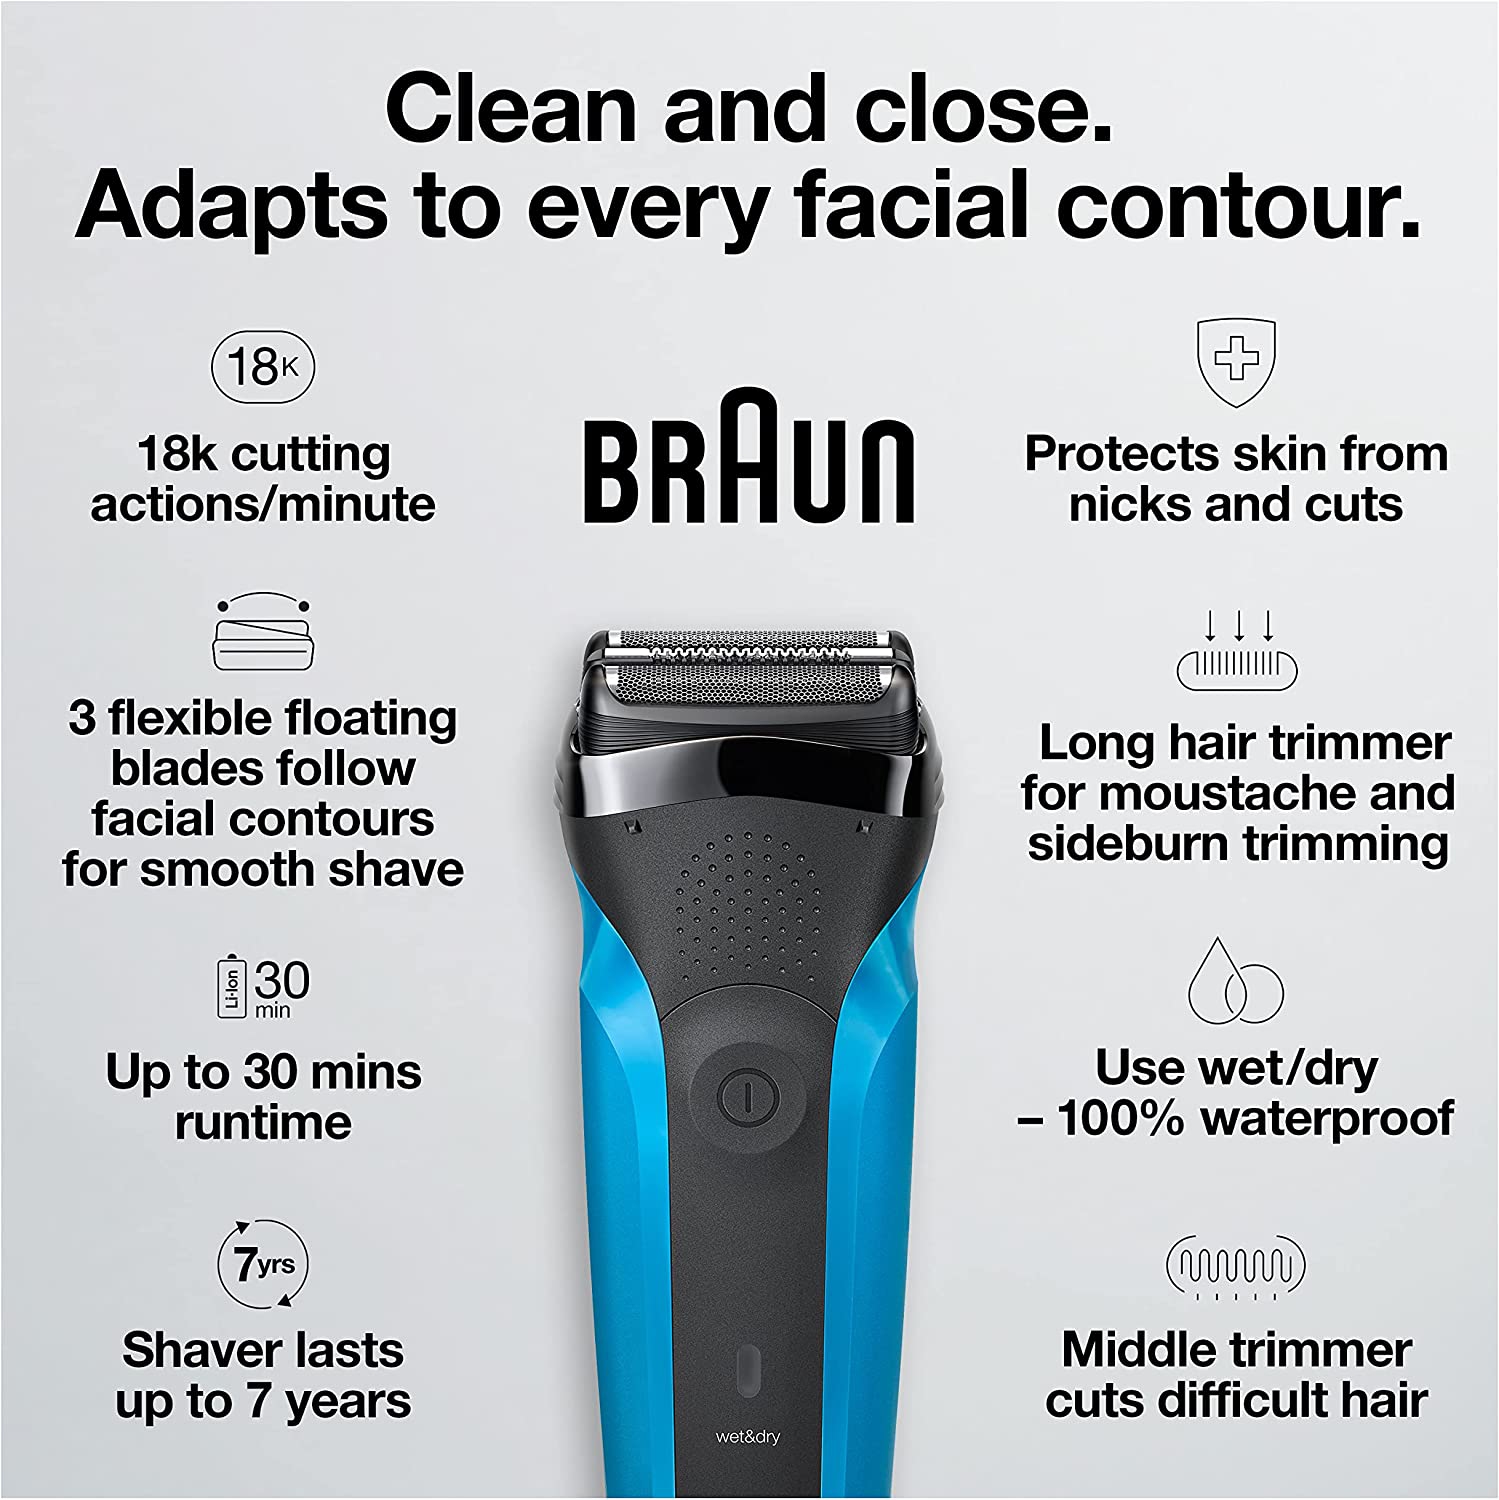 Braun Series 3 Shave Style 310BT Electric Shaver Wet Dry Razor for